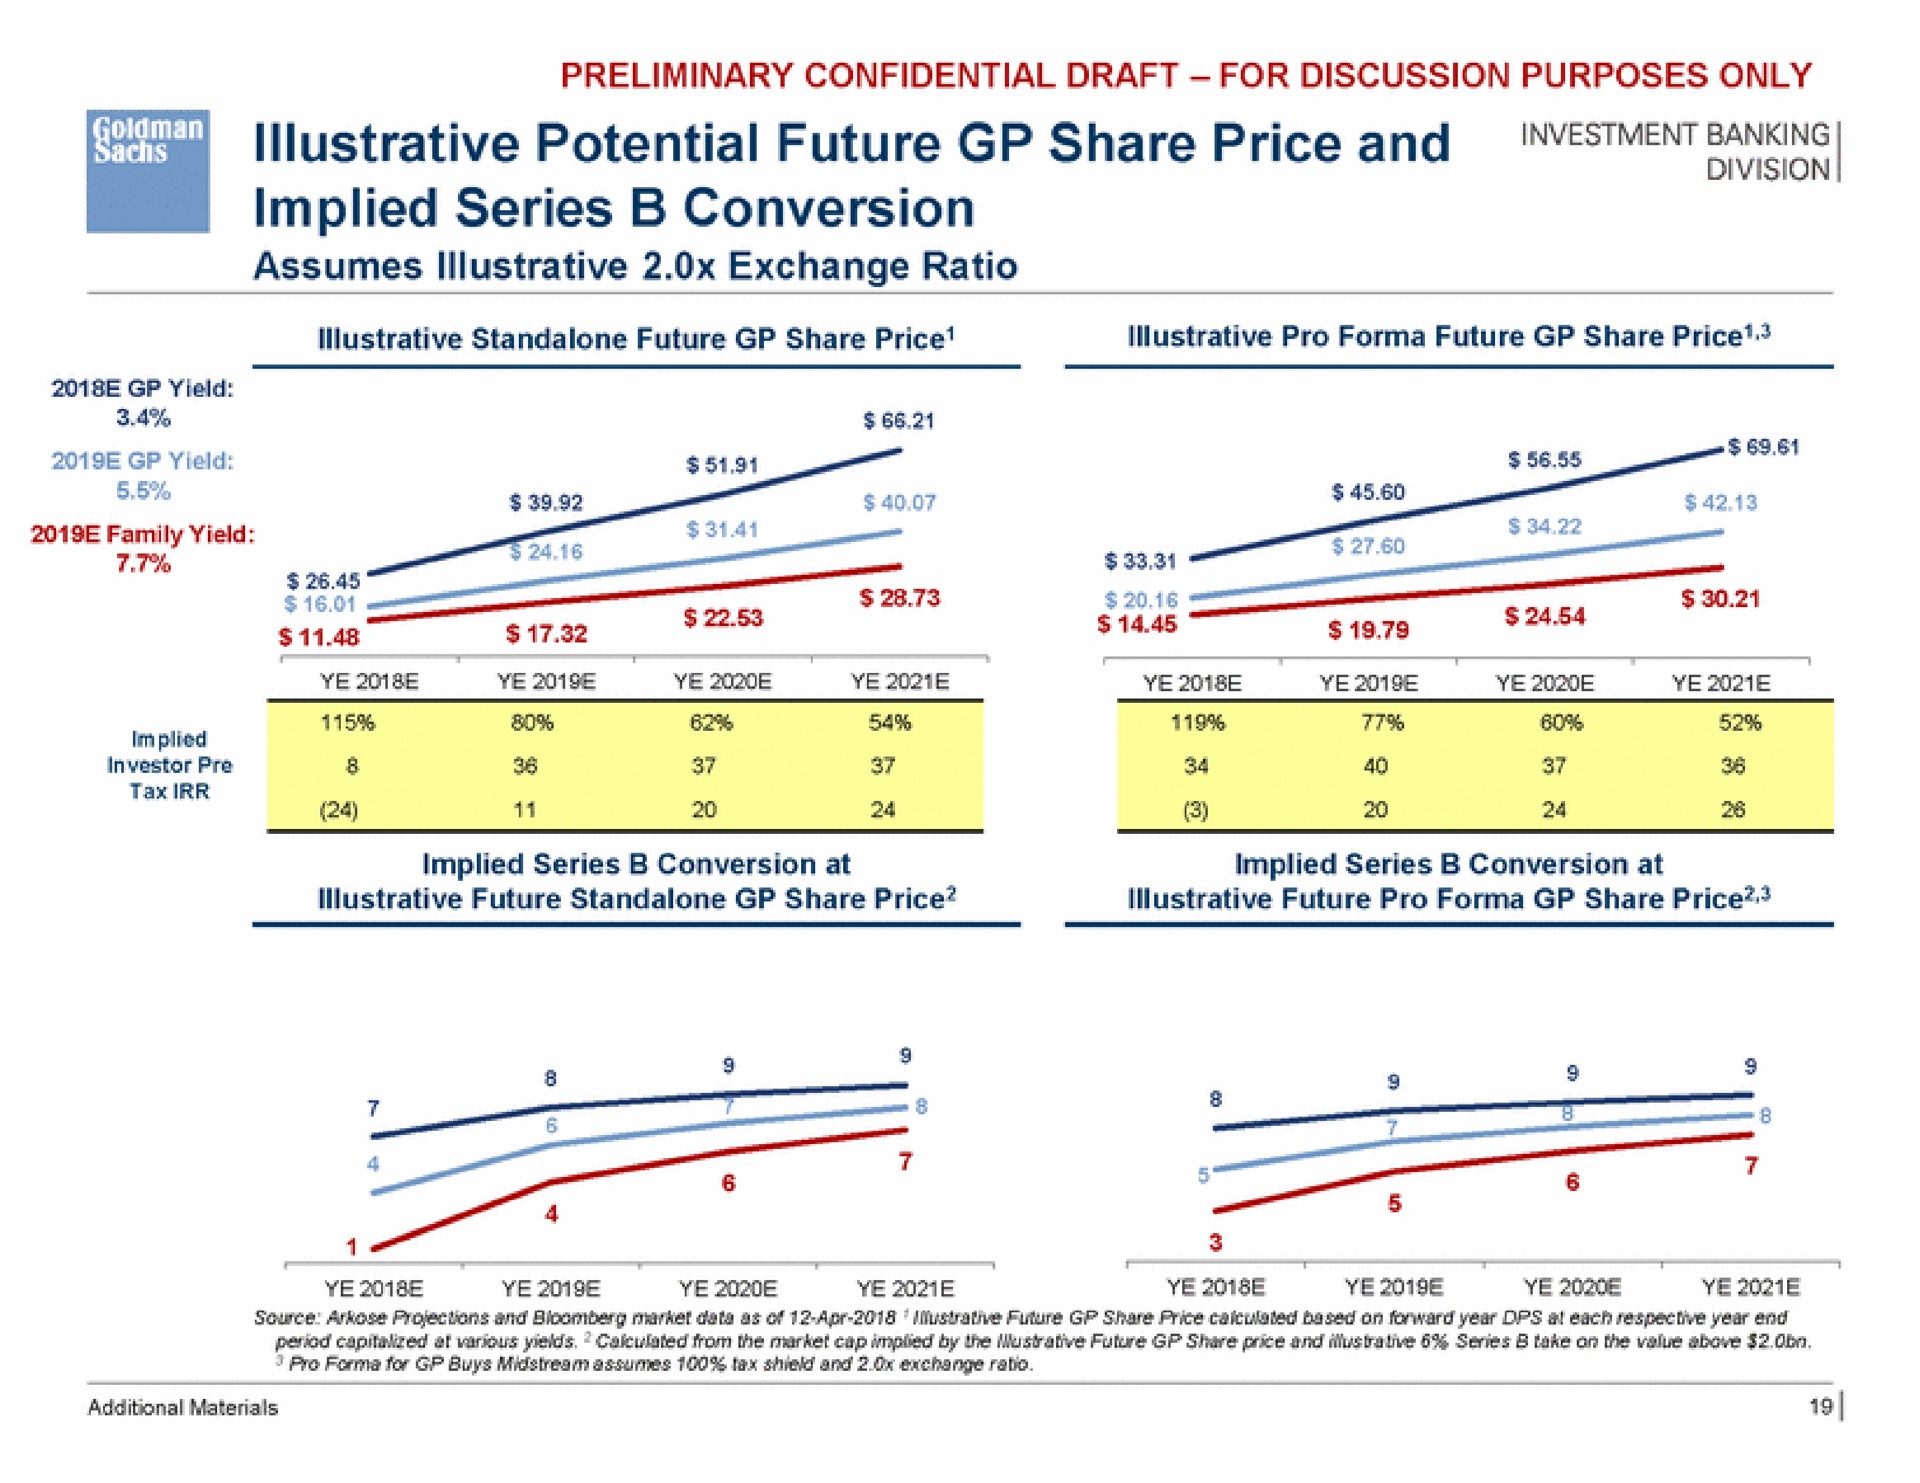 illustrative potential future share price and implied series conversion | Goldman Sachs